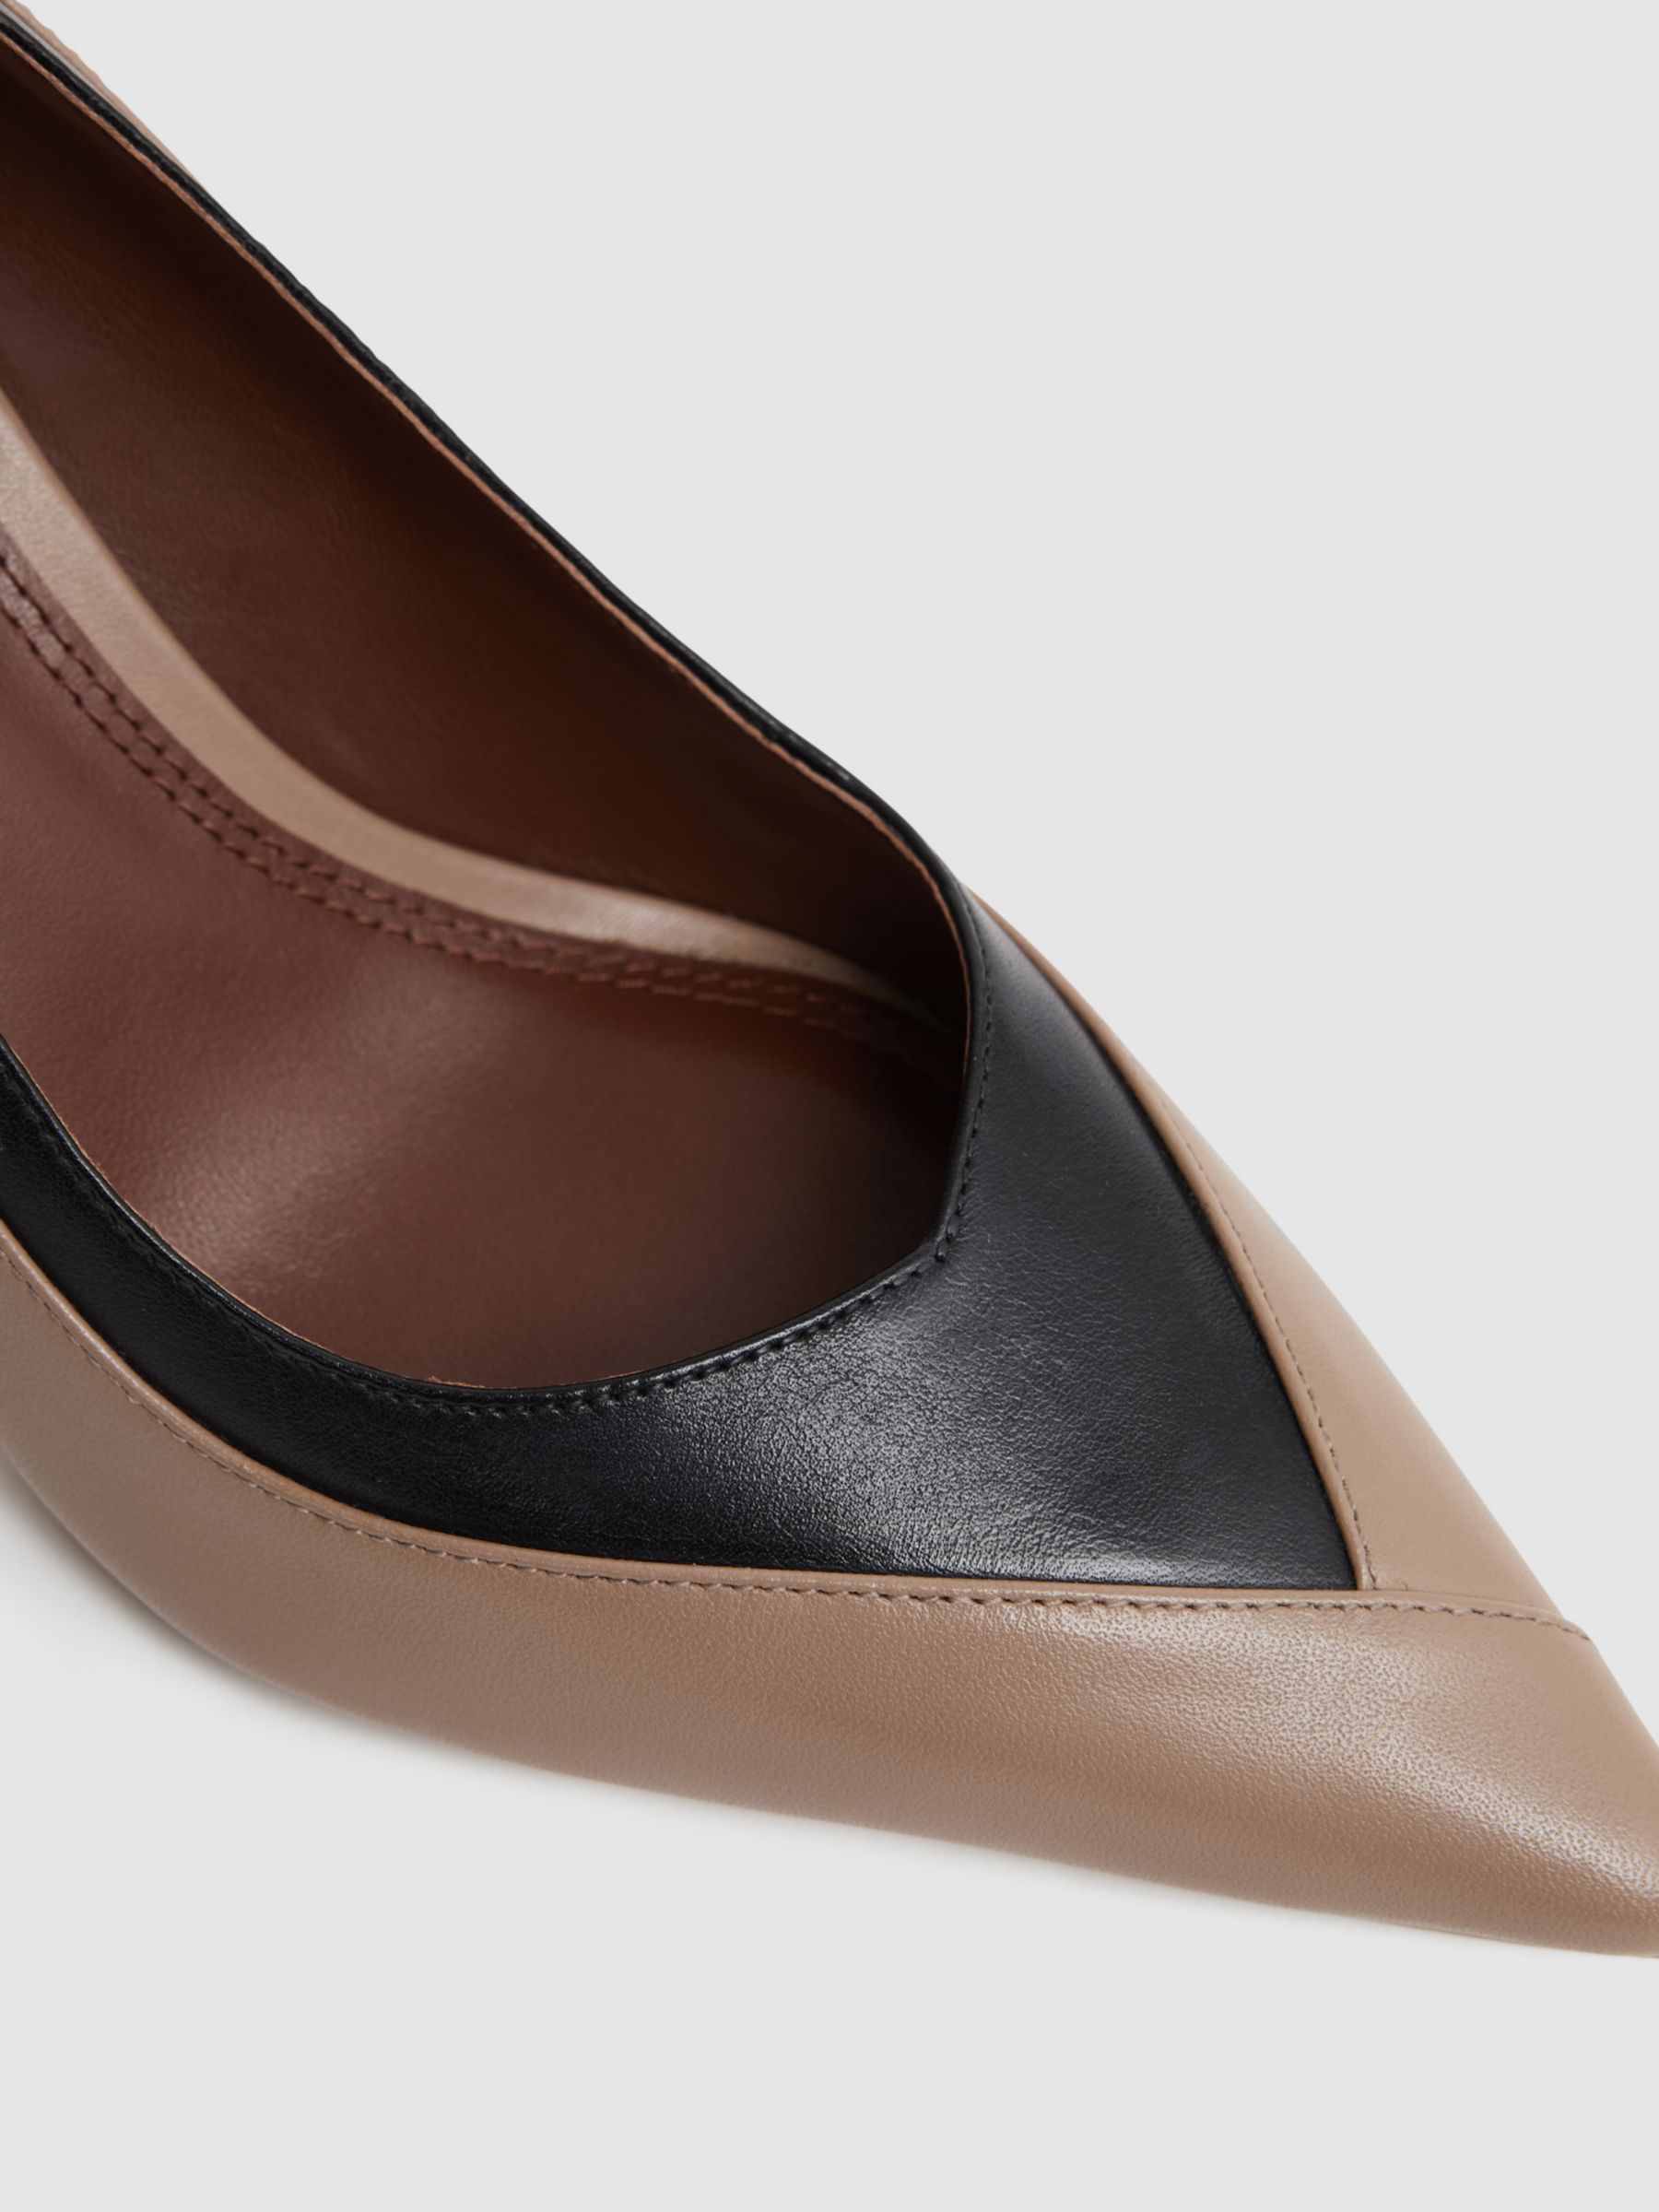 Buy Reiss Gwyneth High Heel Leather Court Shoes, Camel/Black Online at johnlewis.com